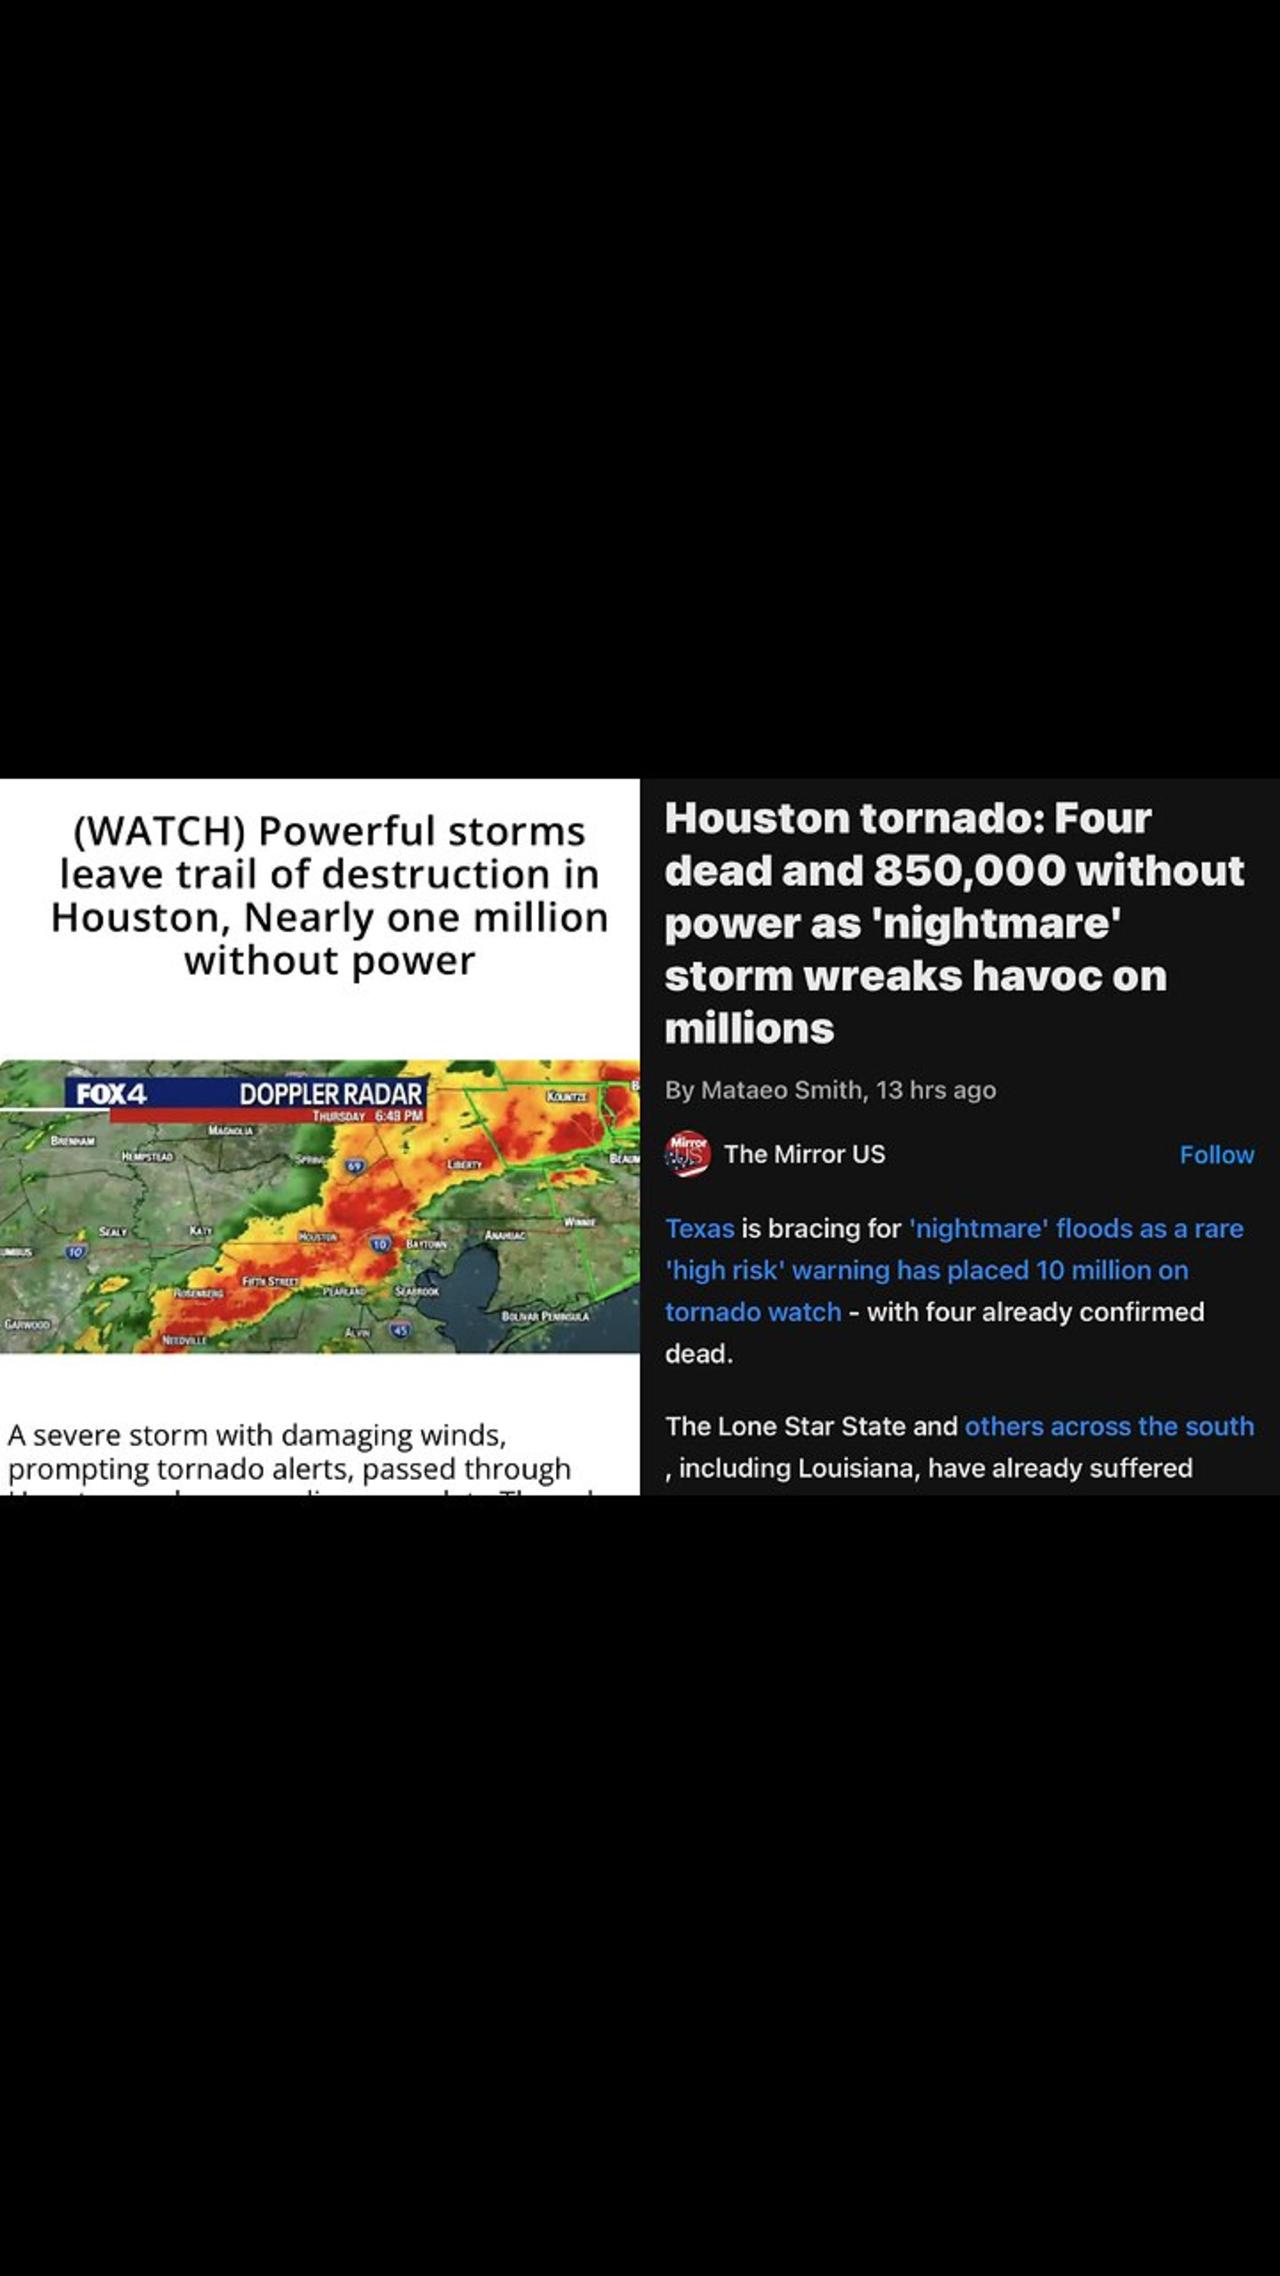 Houston Tornado 🌪️: 4 Dead & 850,000 without power